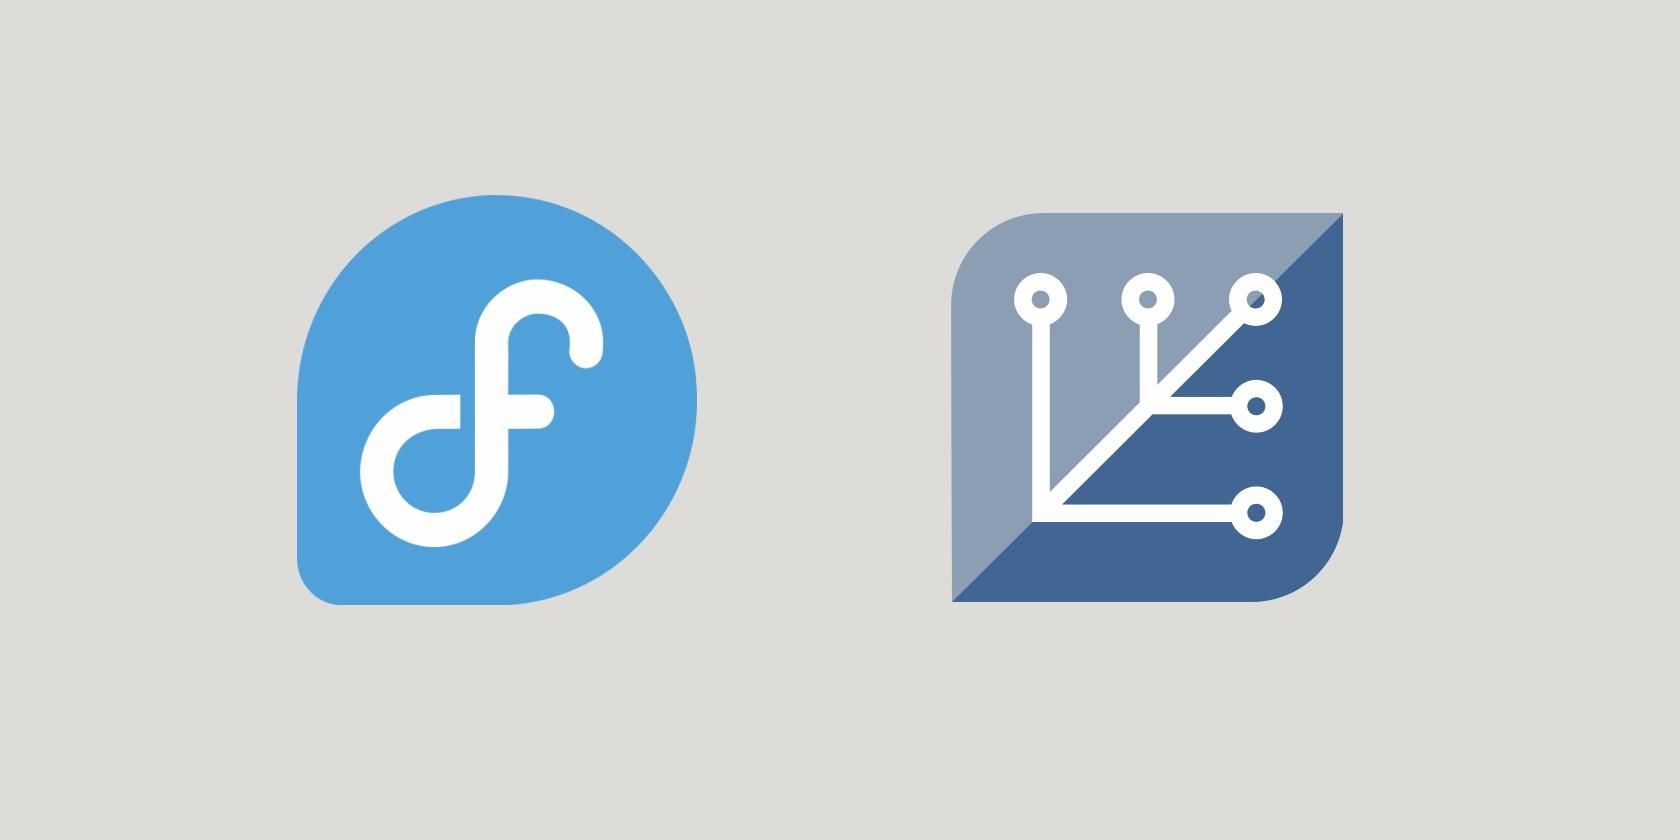 fedora silverblue and workstation logos